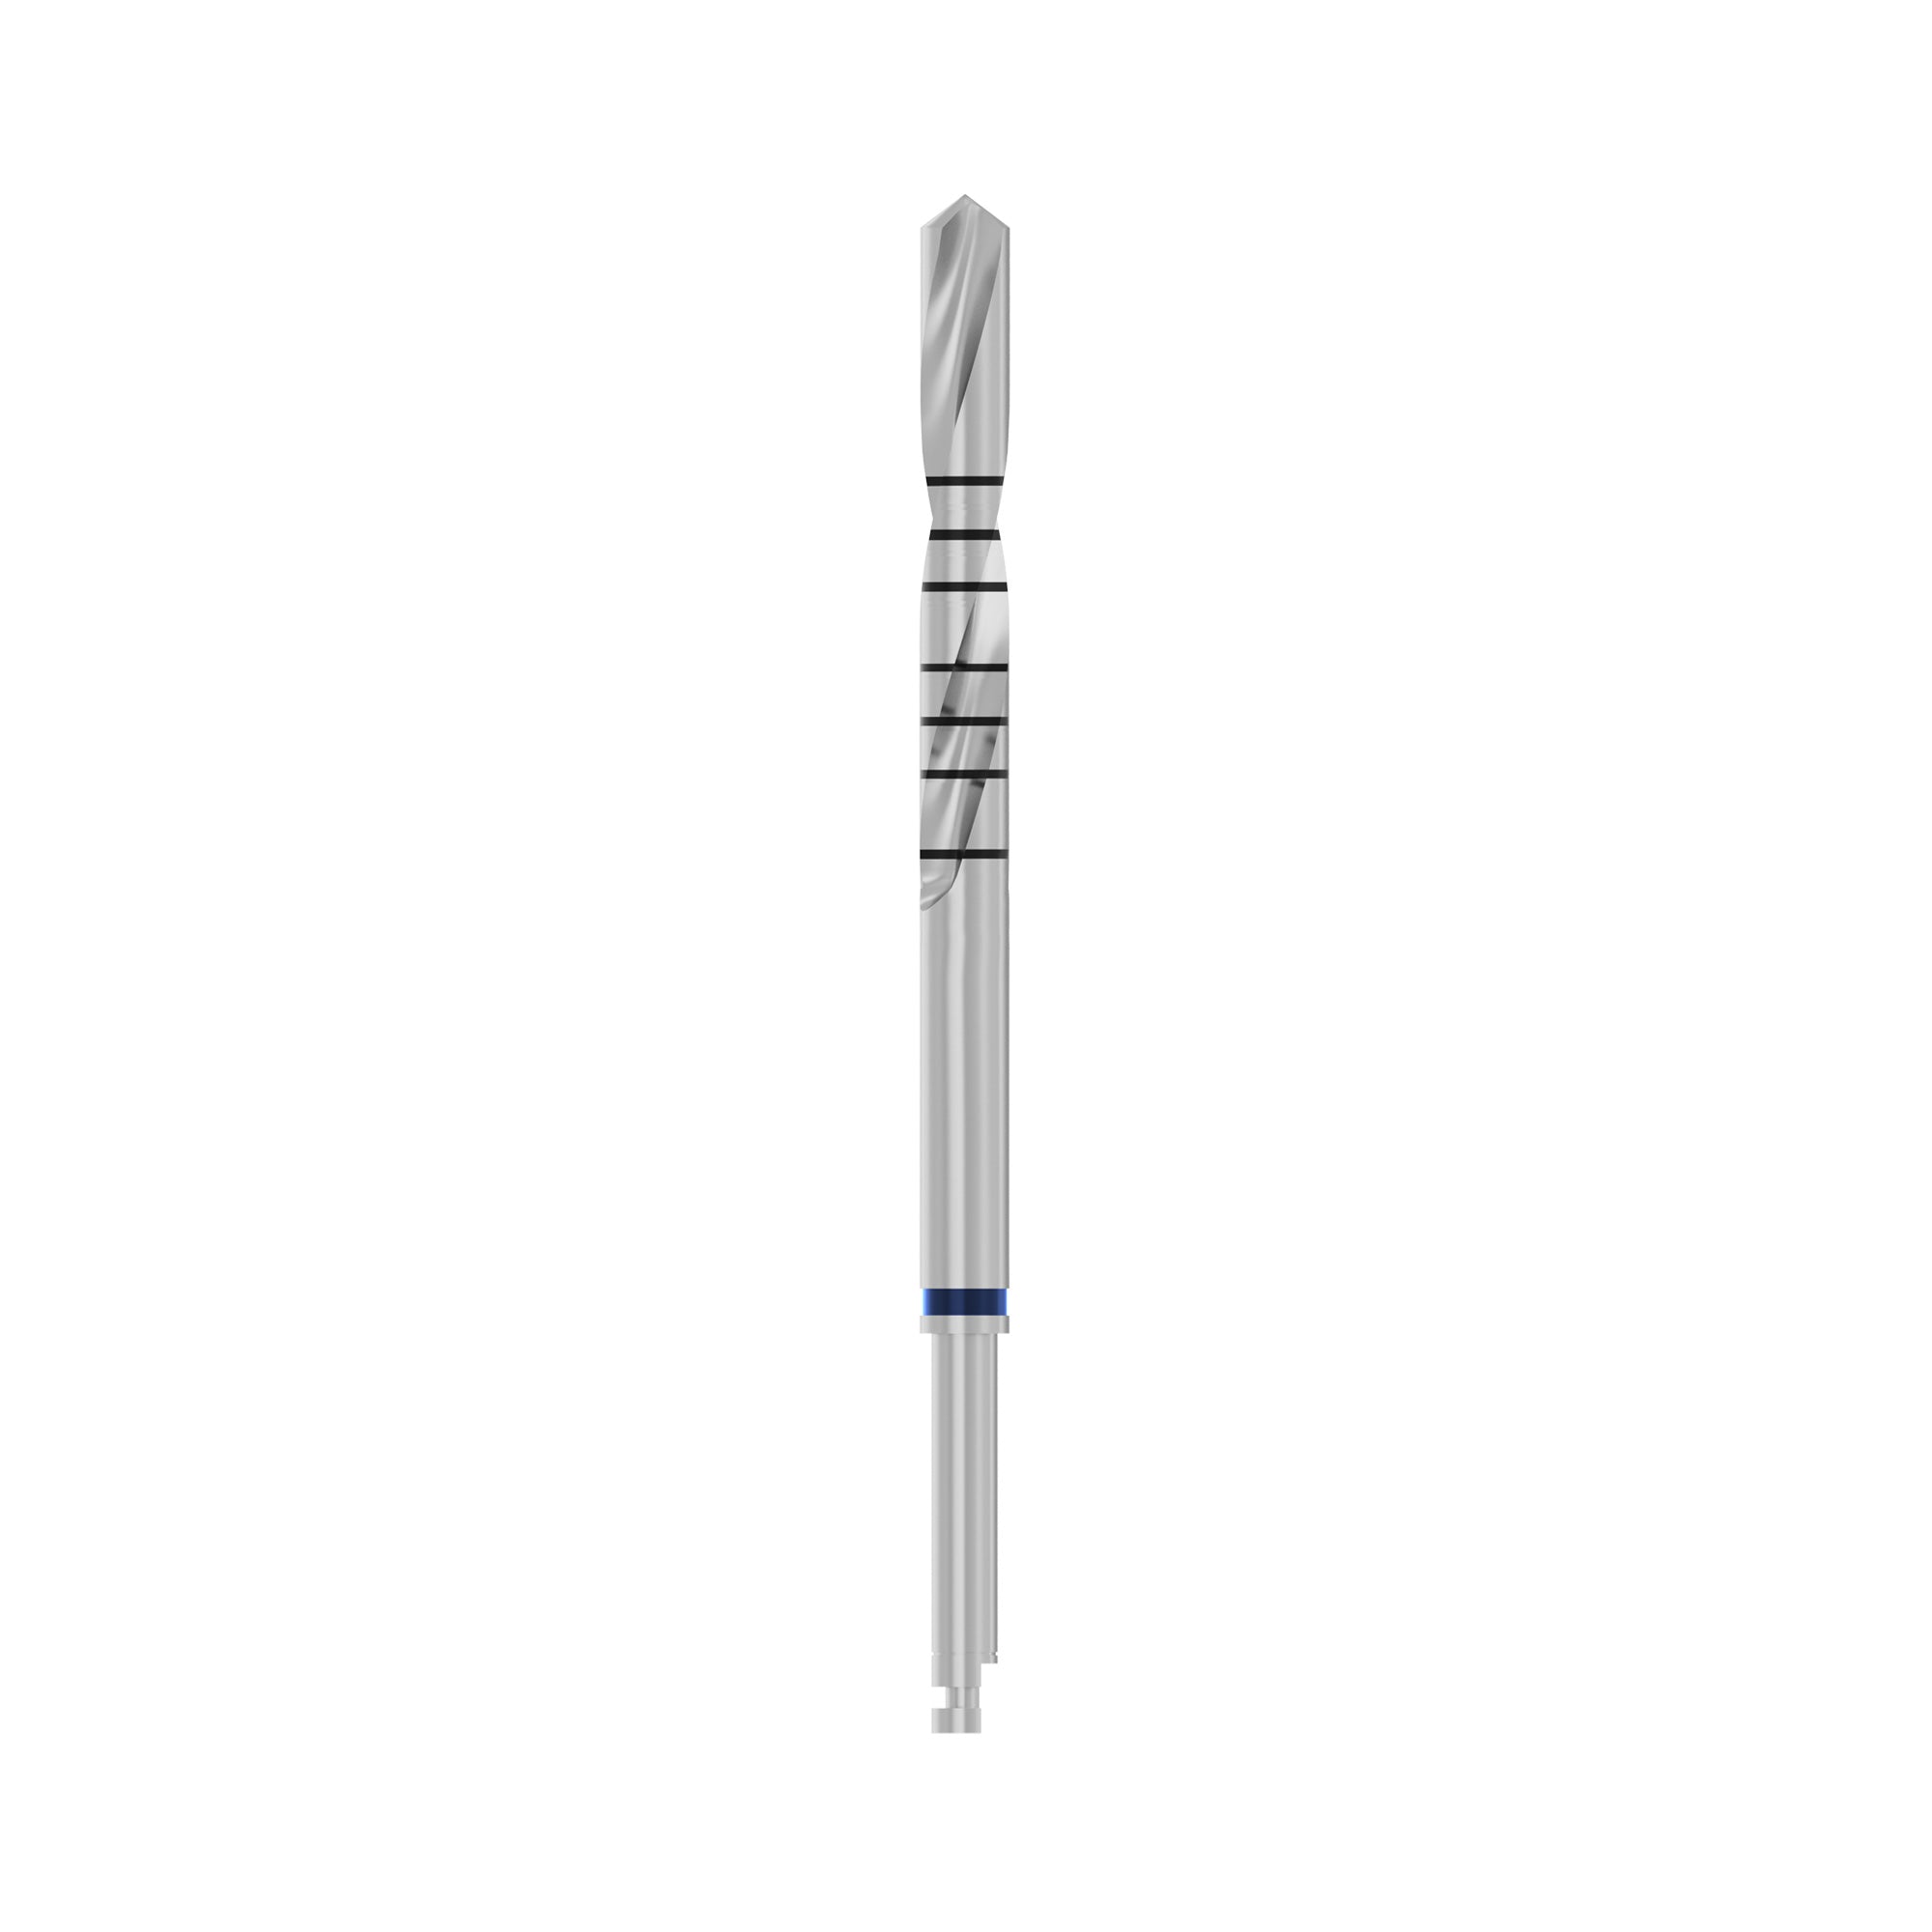 DSI Surgical Implantology Cylindrical Drill For Basal/Ptery Implant L43mm